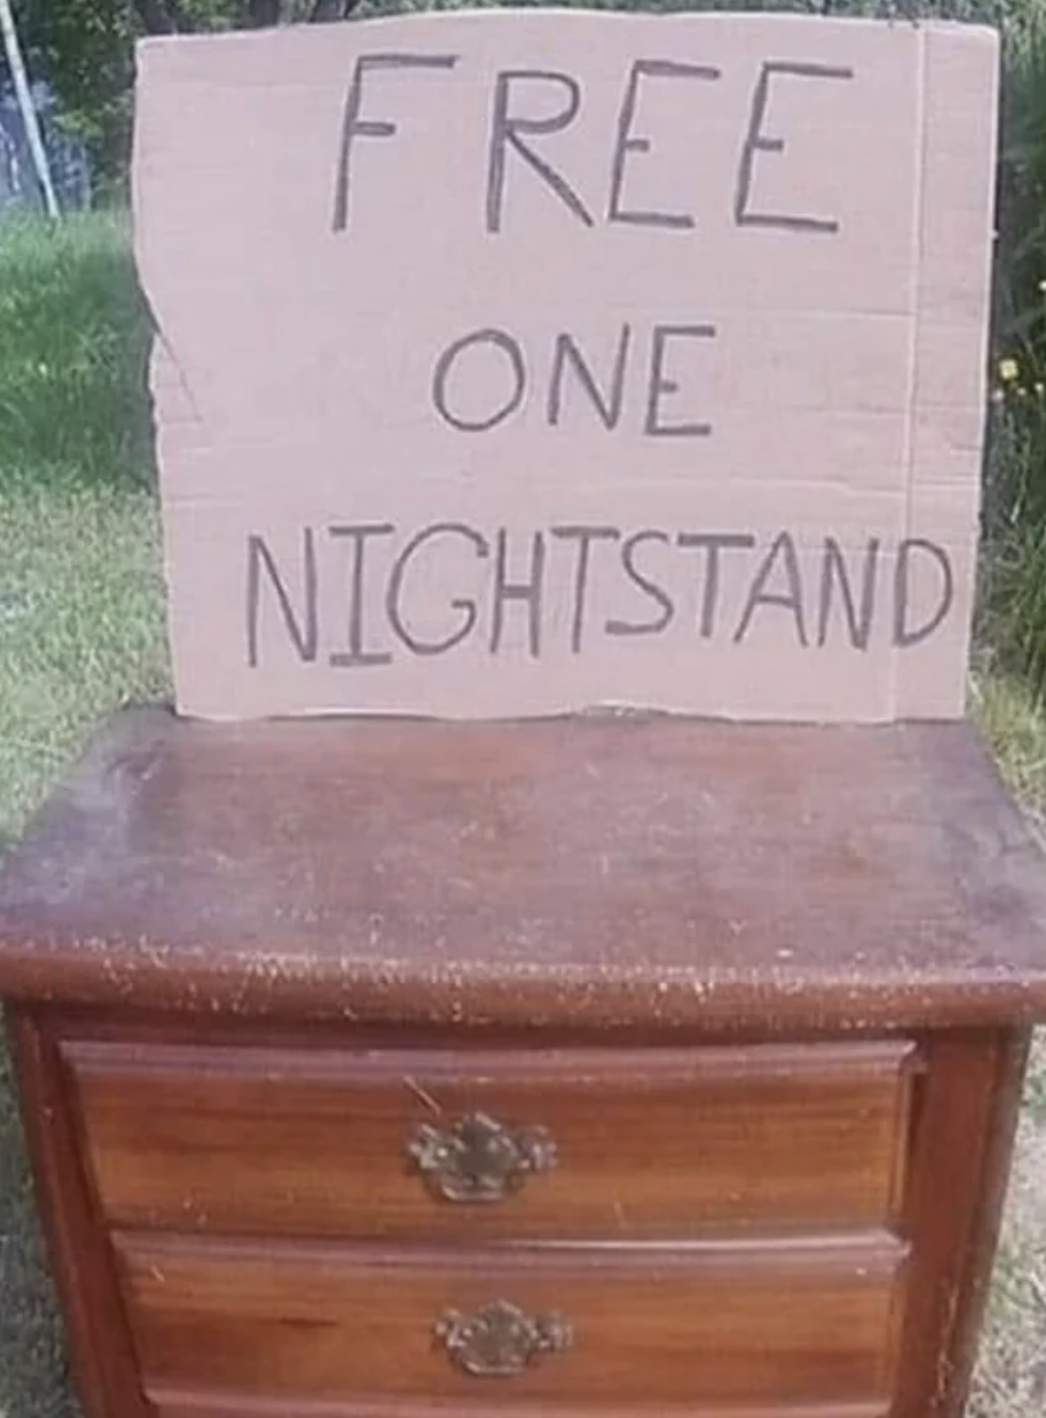 &quot;Free one nightstand&quot;